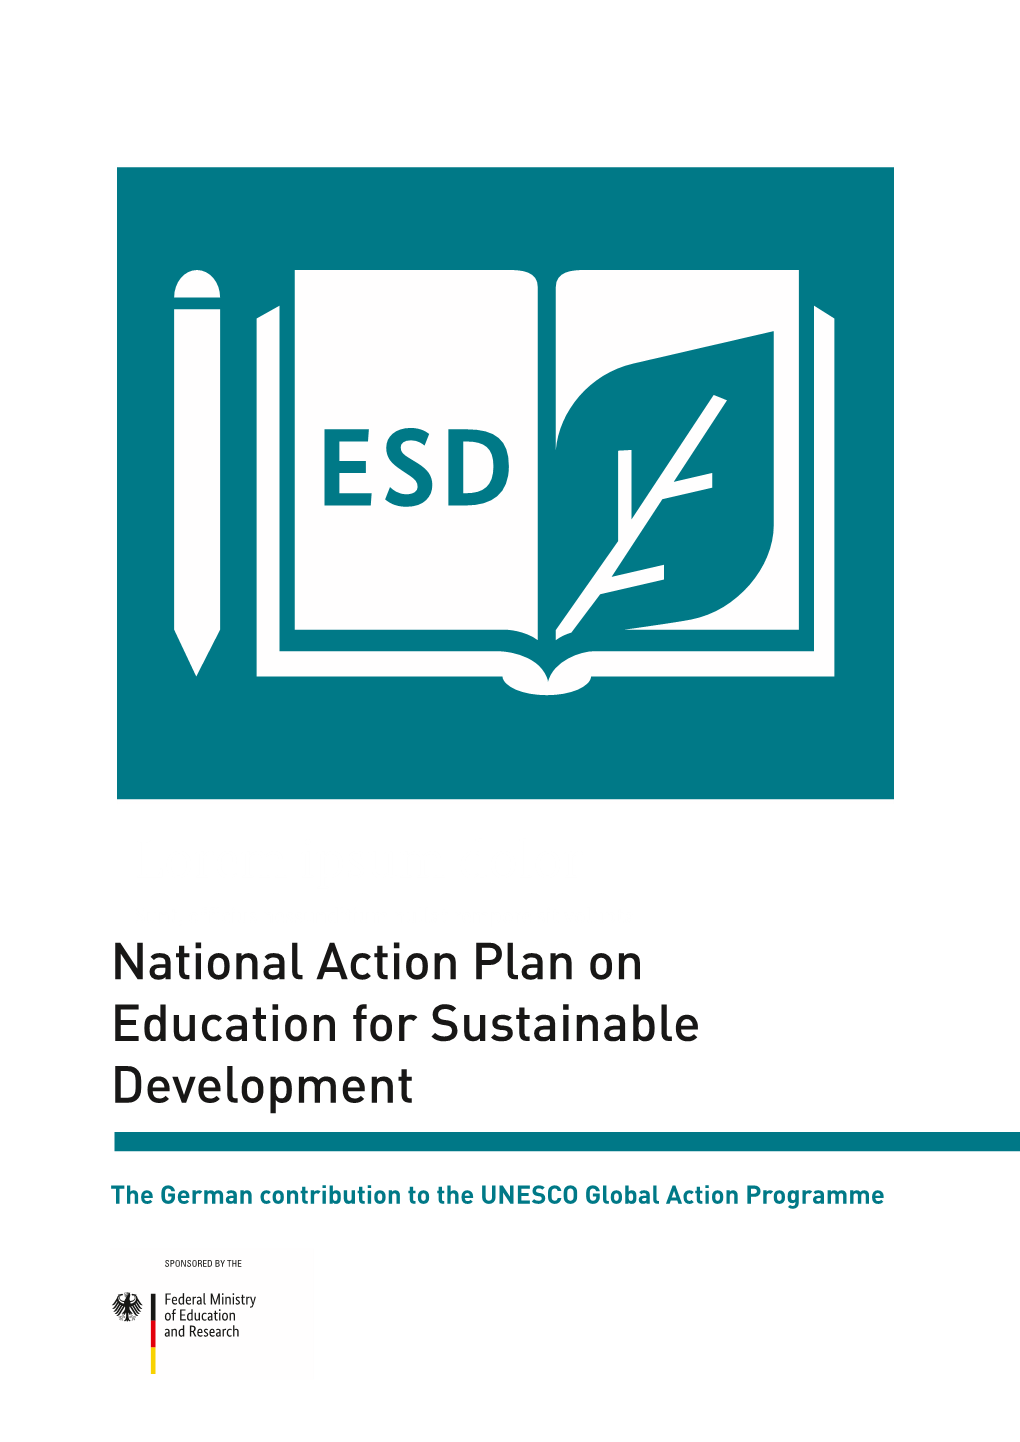 1. the National Action Plan on Education for Sustainable Development 5